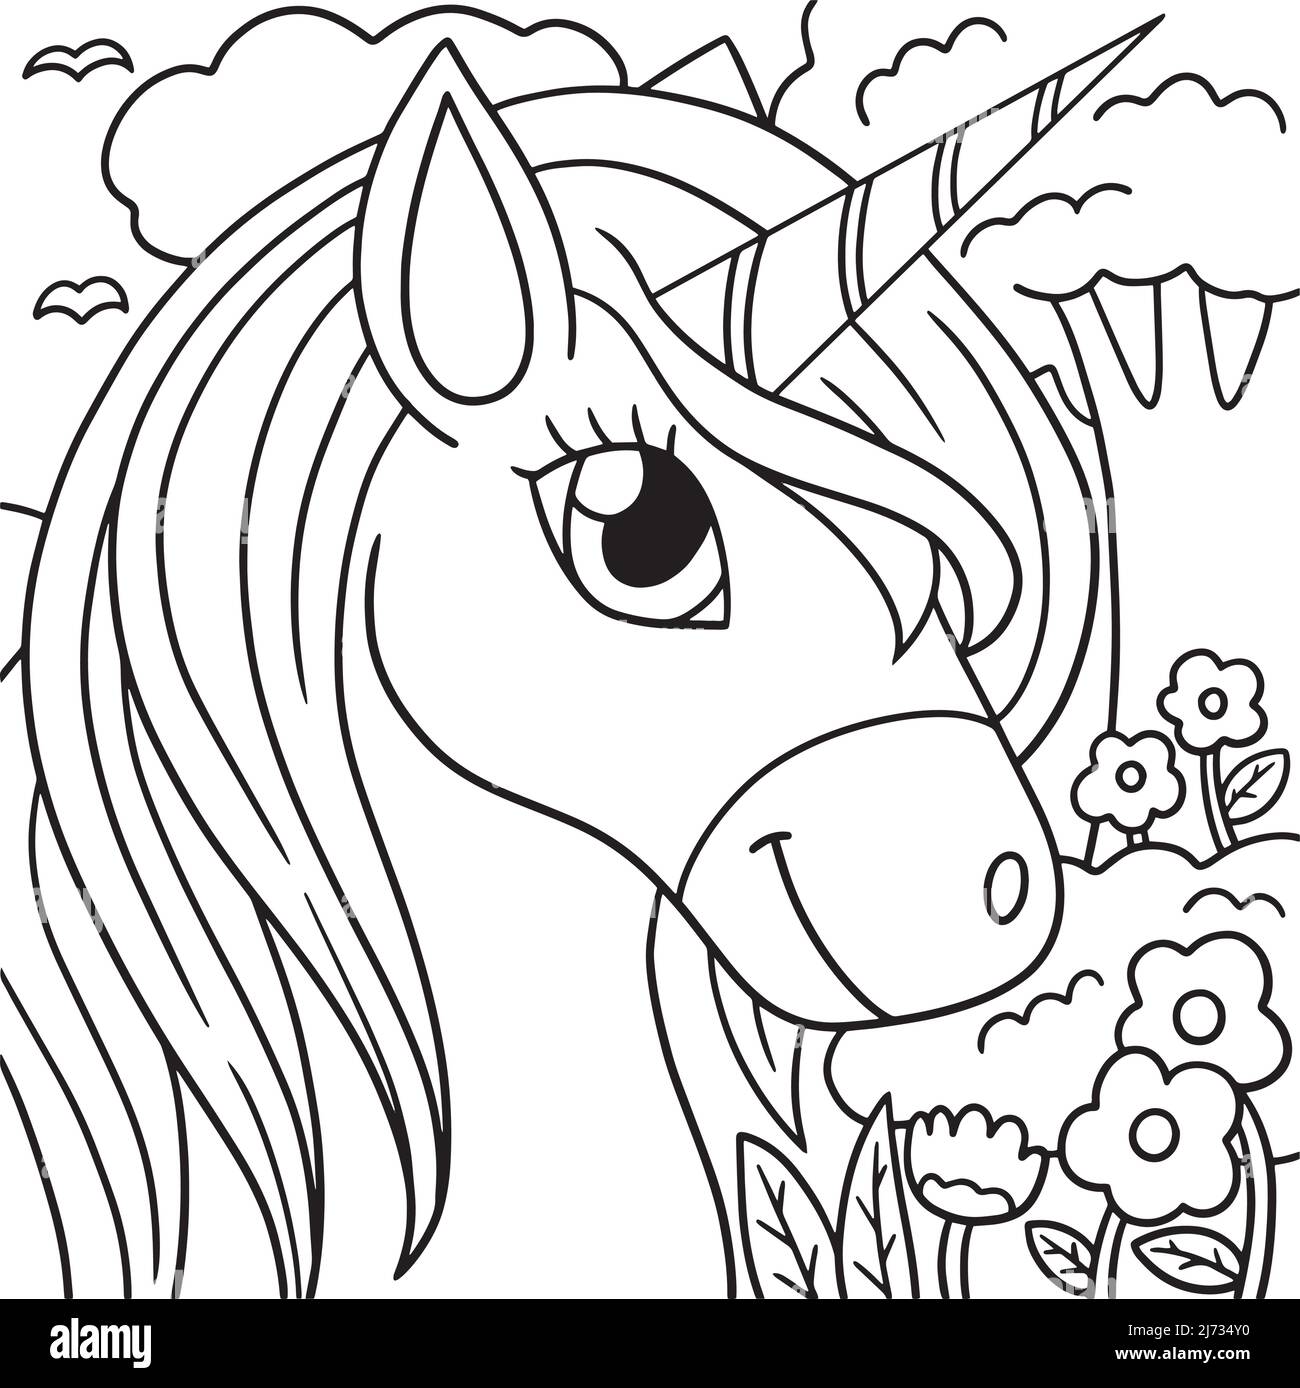 Unicorn head coloring page for kids stock vector image art